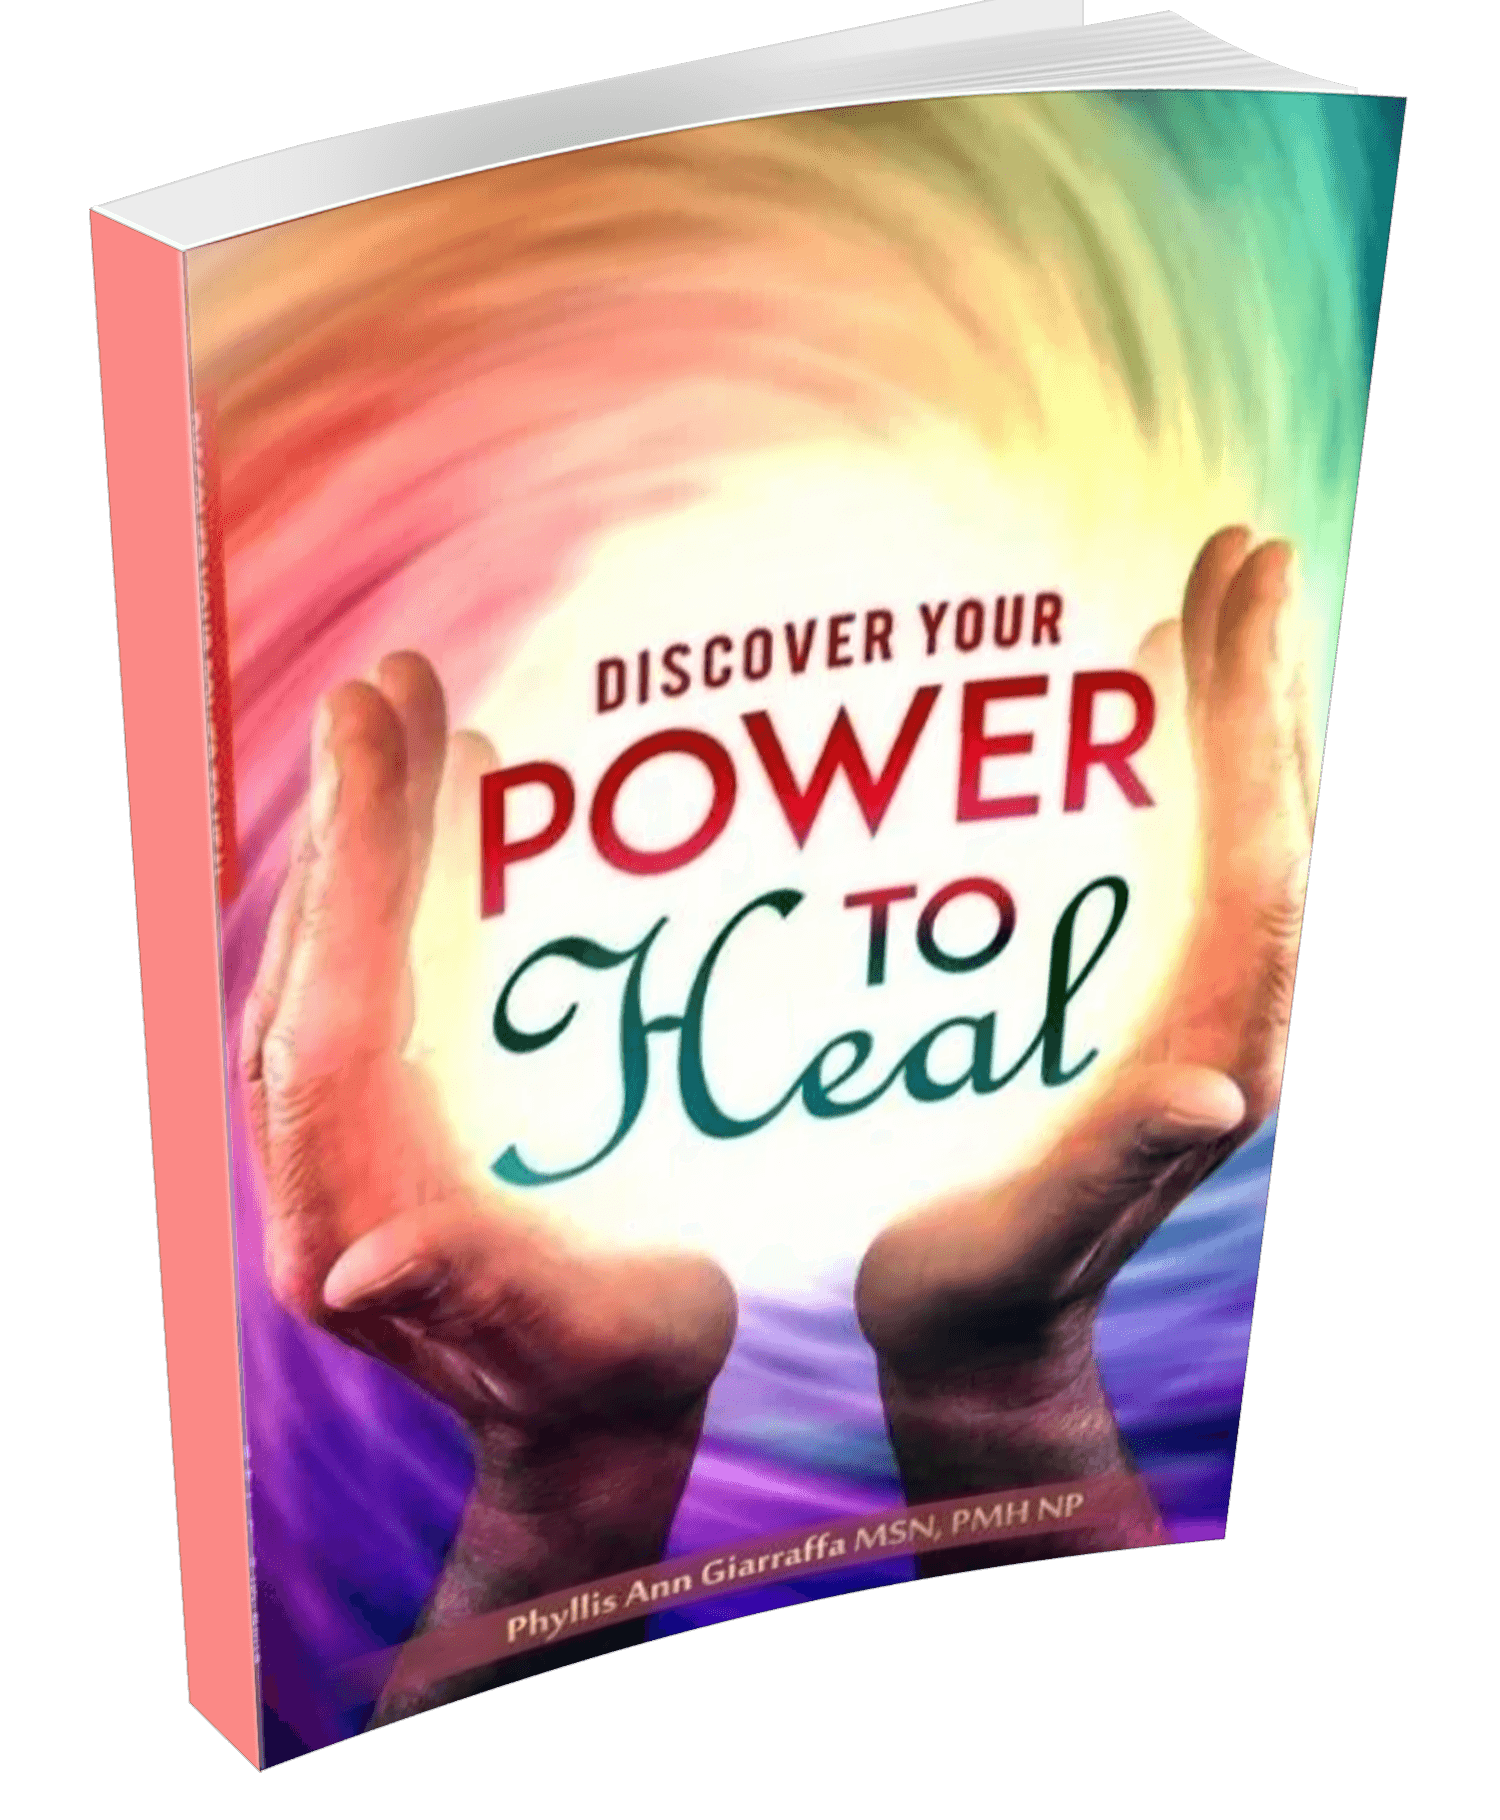 Discover your power to heal